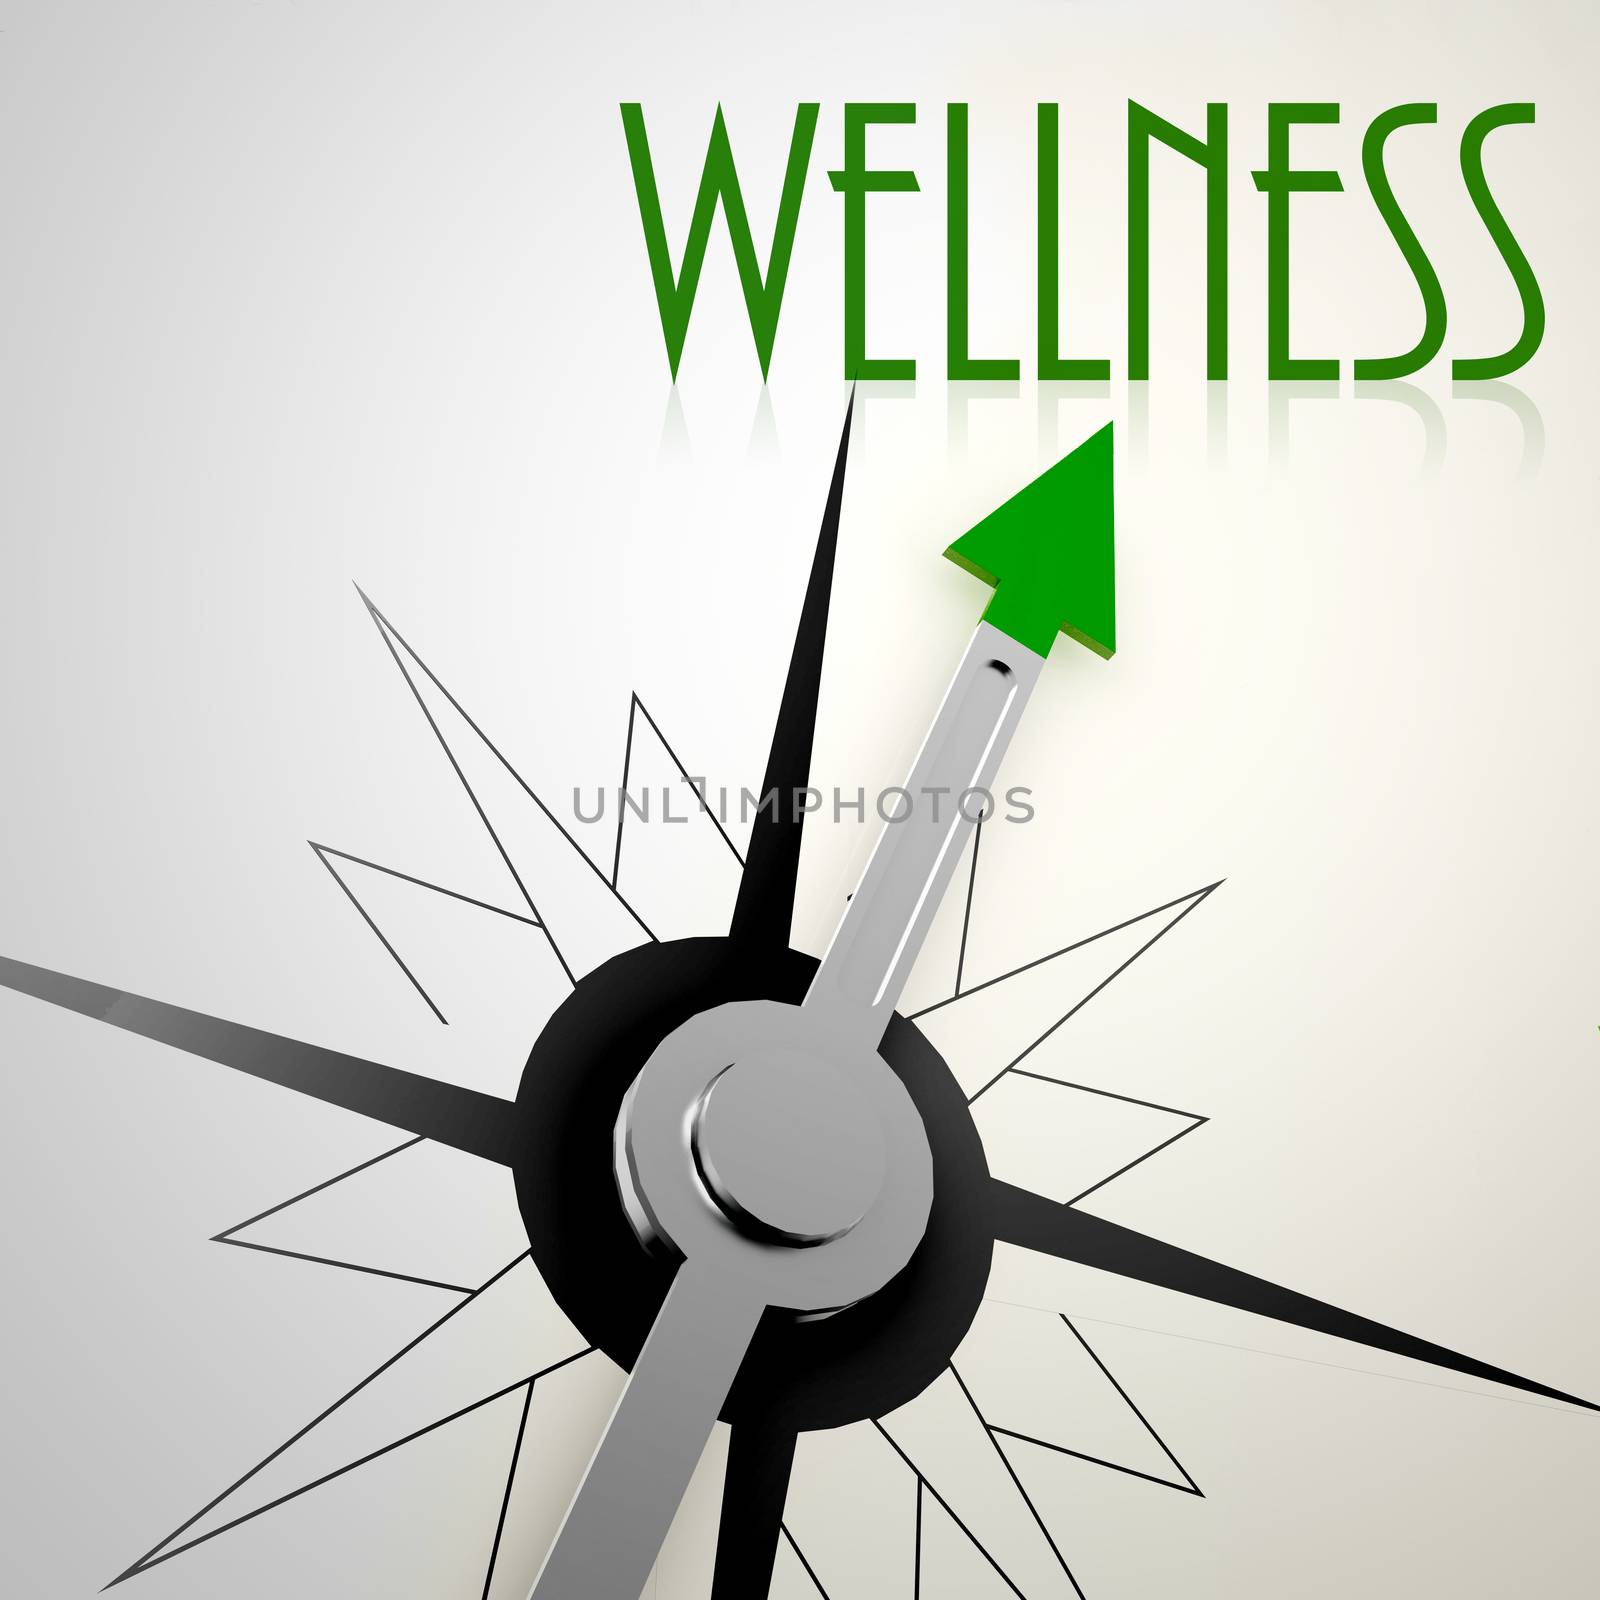 Wellness on green compass by tang90246